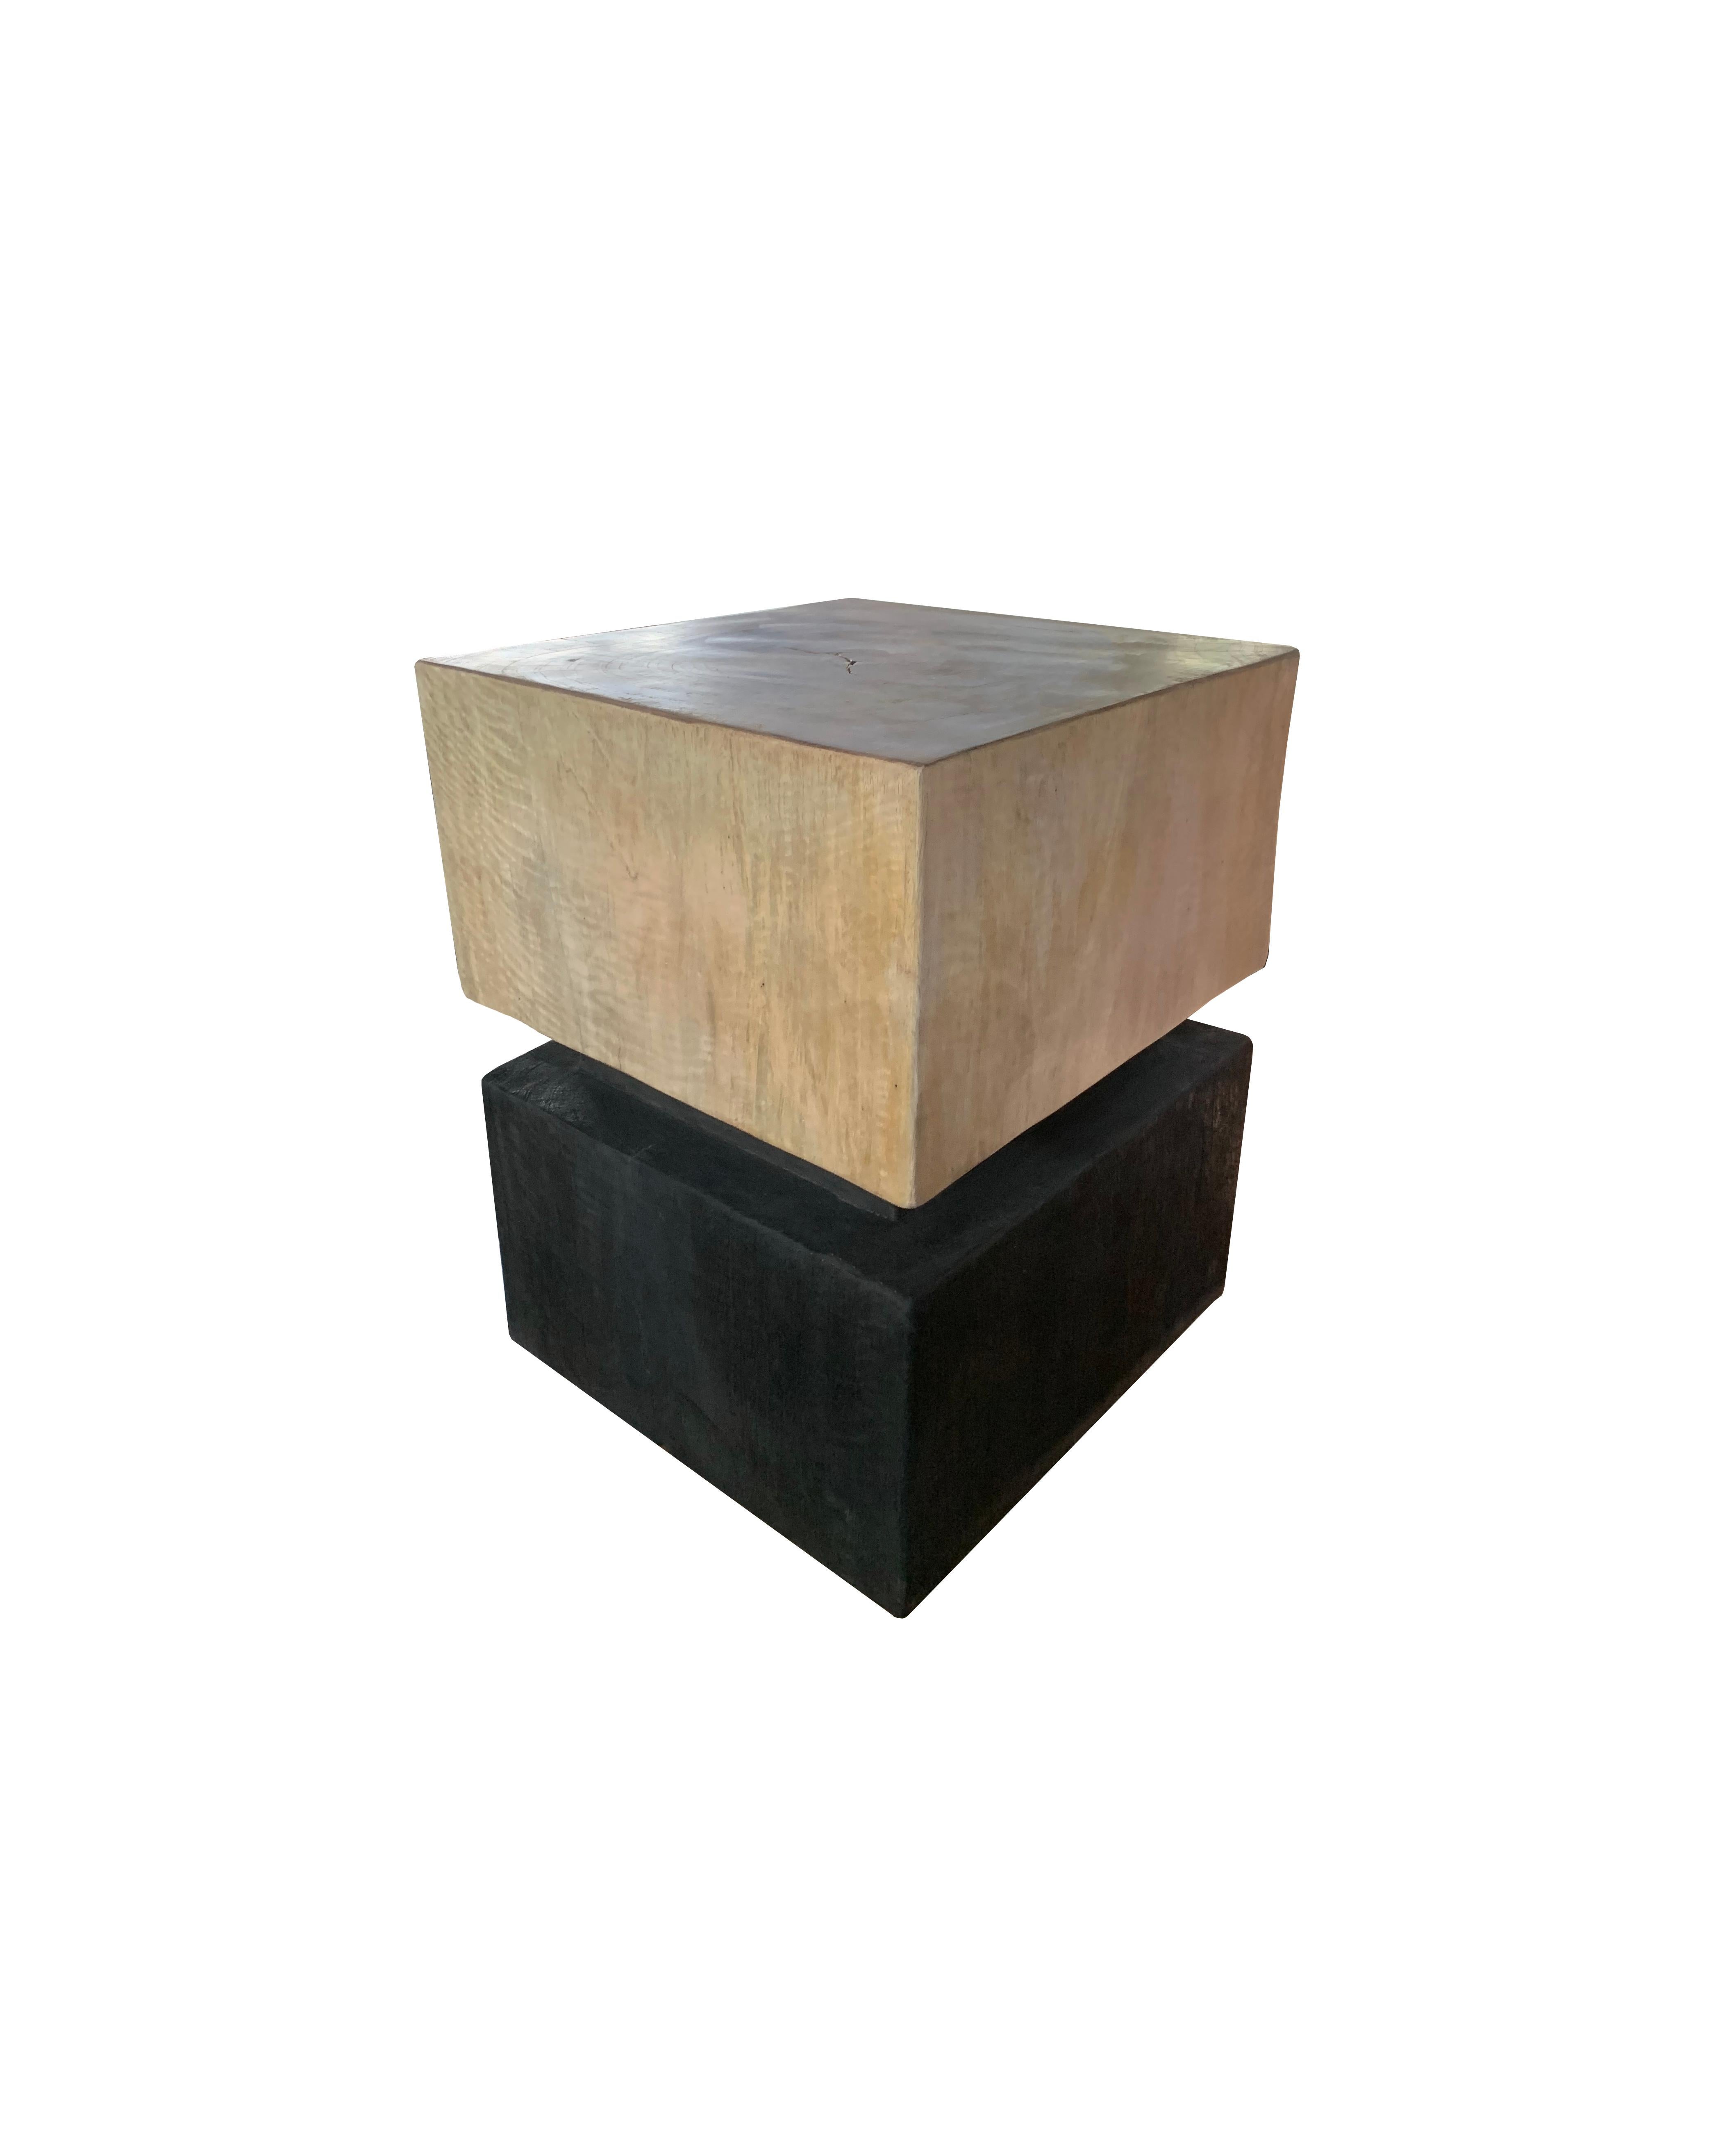 A wonderfully sculptural round side table or stool. Its neutral pigments make it perfect for any space. A uniquely sculptural and versatile piece certain to invoke conversation. It was crafted from a solid block of mango wood and has a smooth